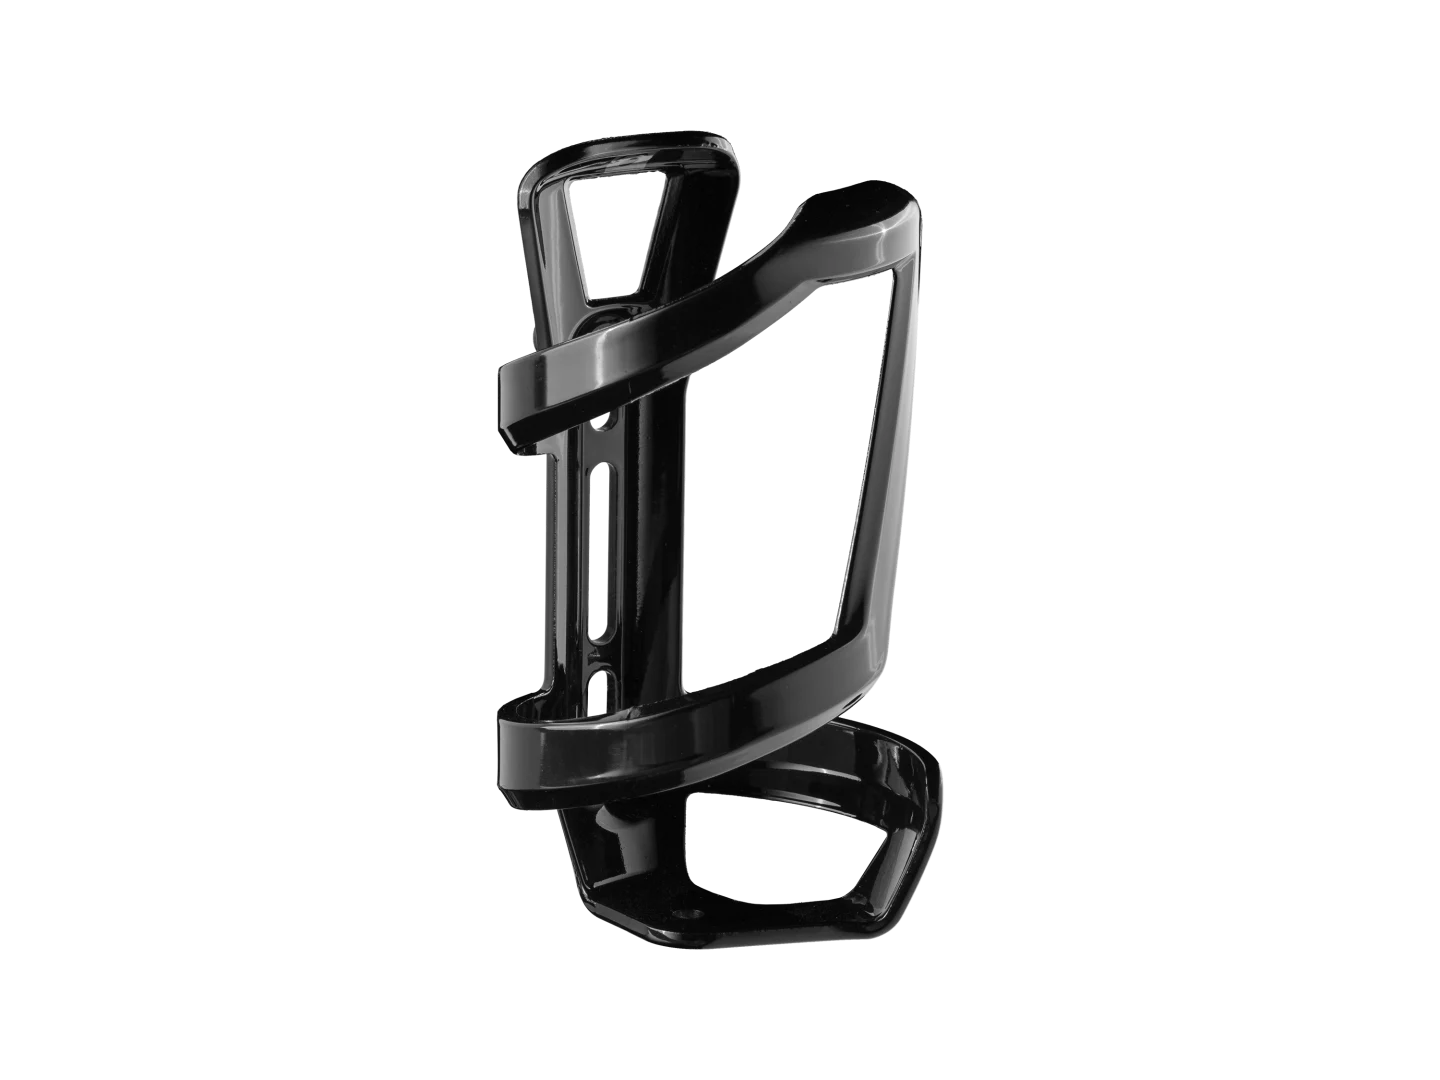 BONTRAGER RIGHT SIDE LOAD RECYCLED WATER BOTTLE CAGE - BLACK/DARK GREY